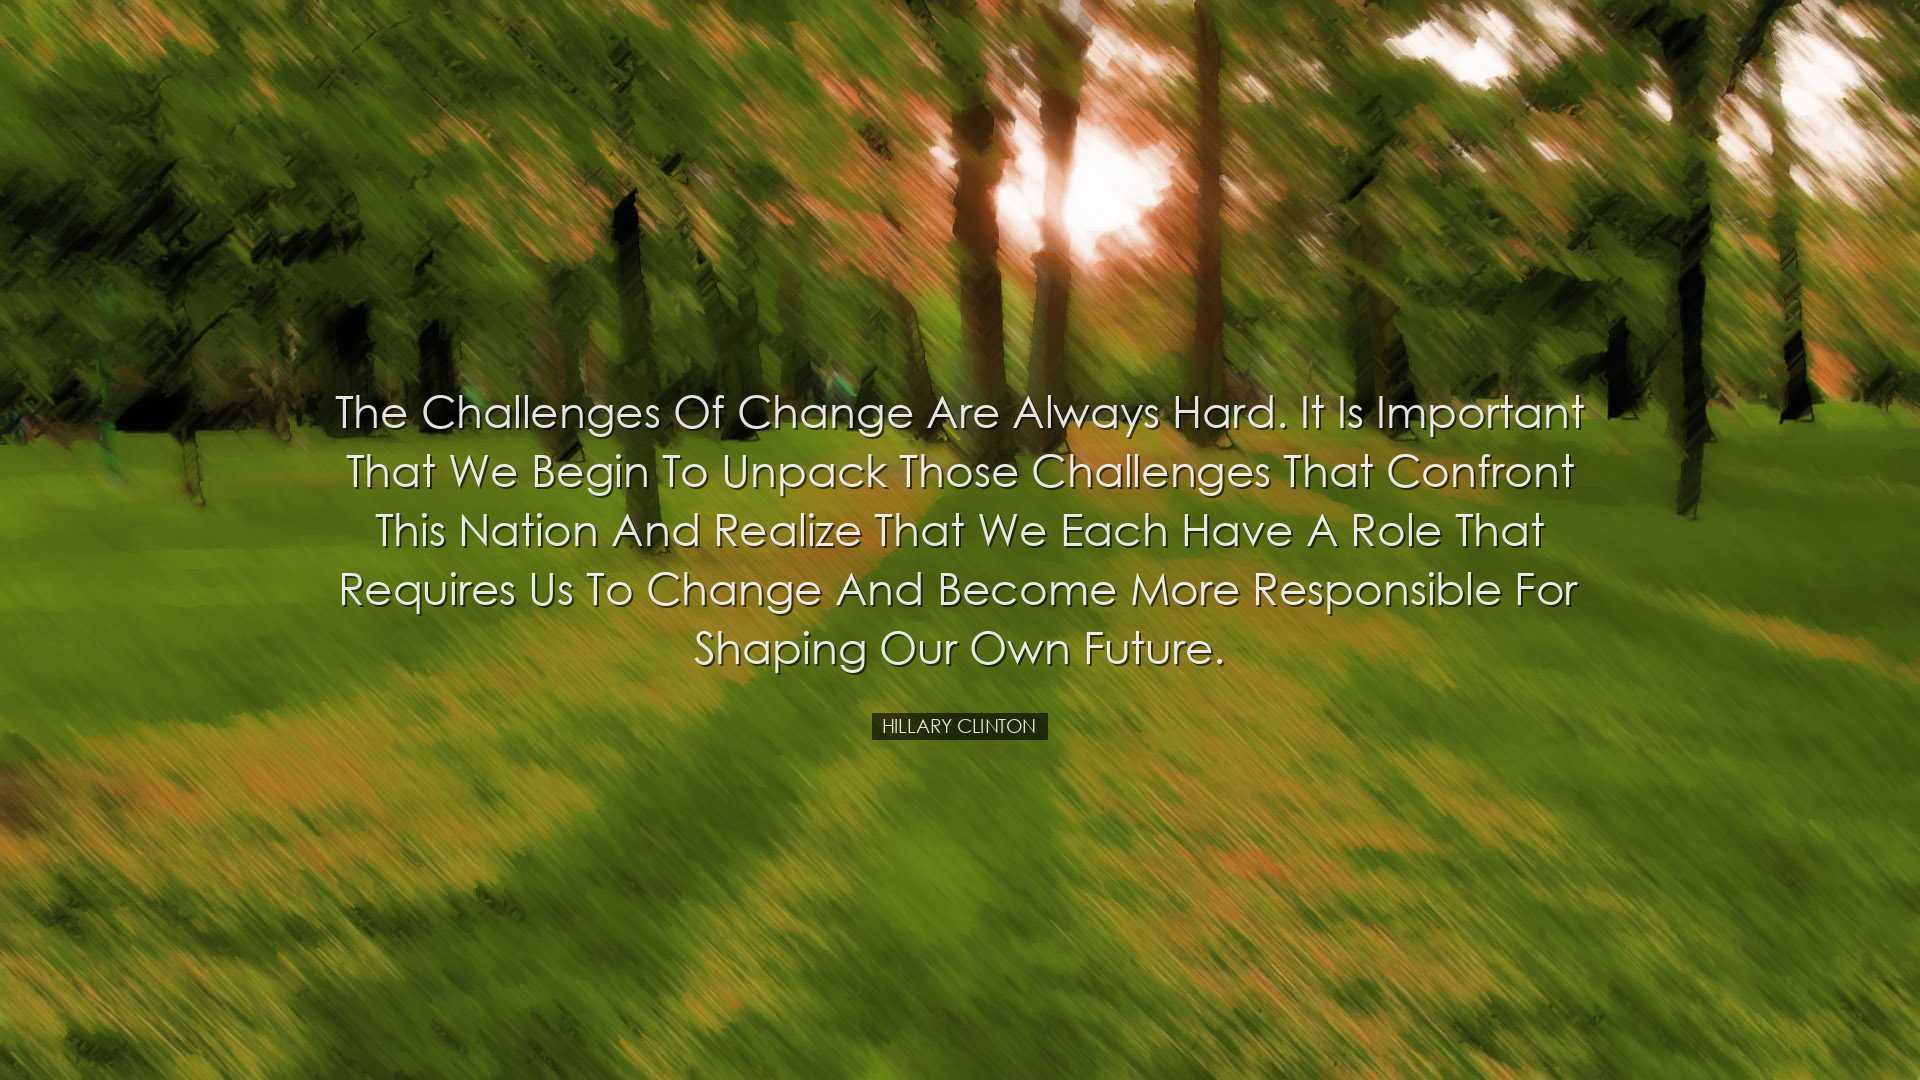 The challenges of change are always hard. It is important that we